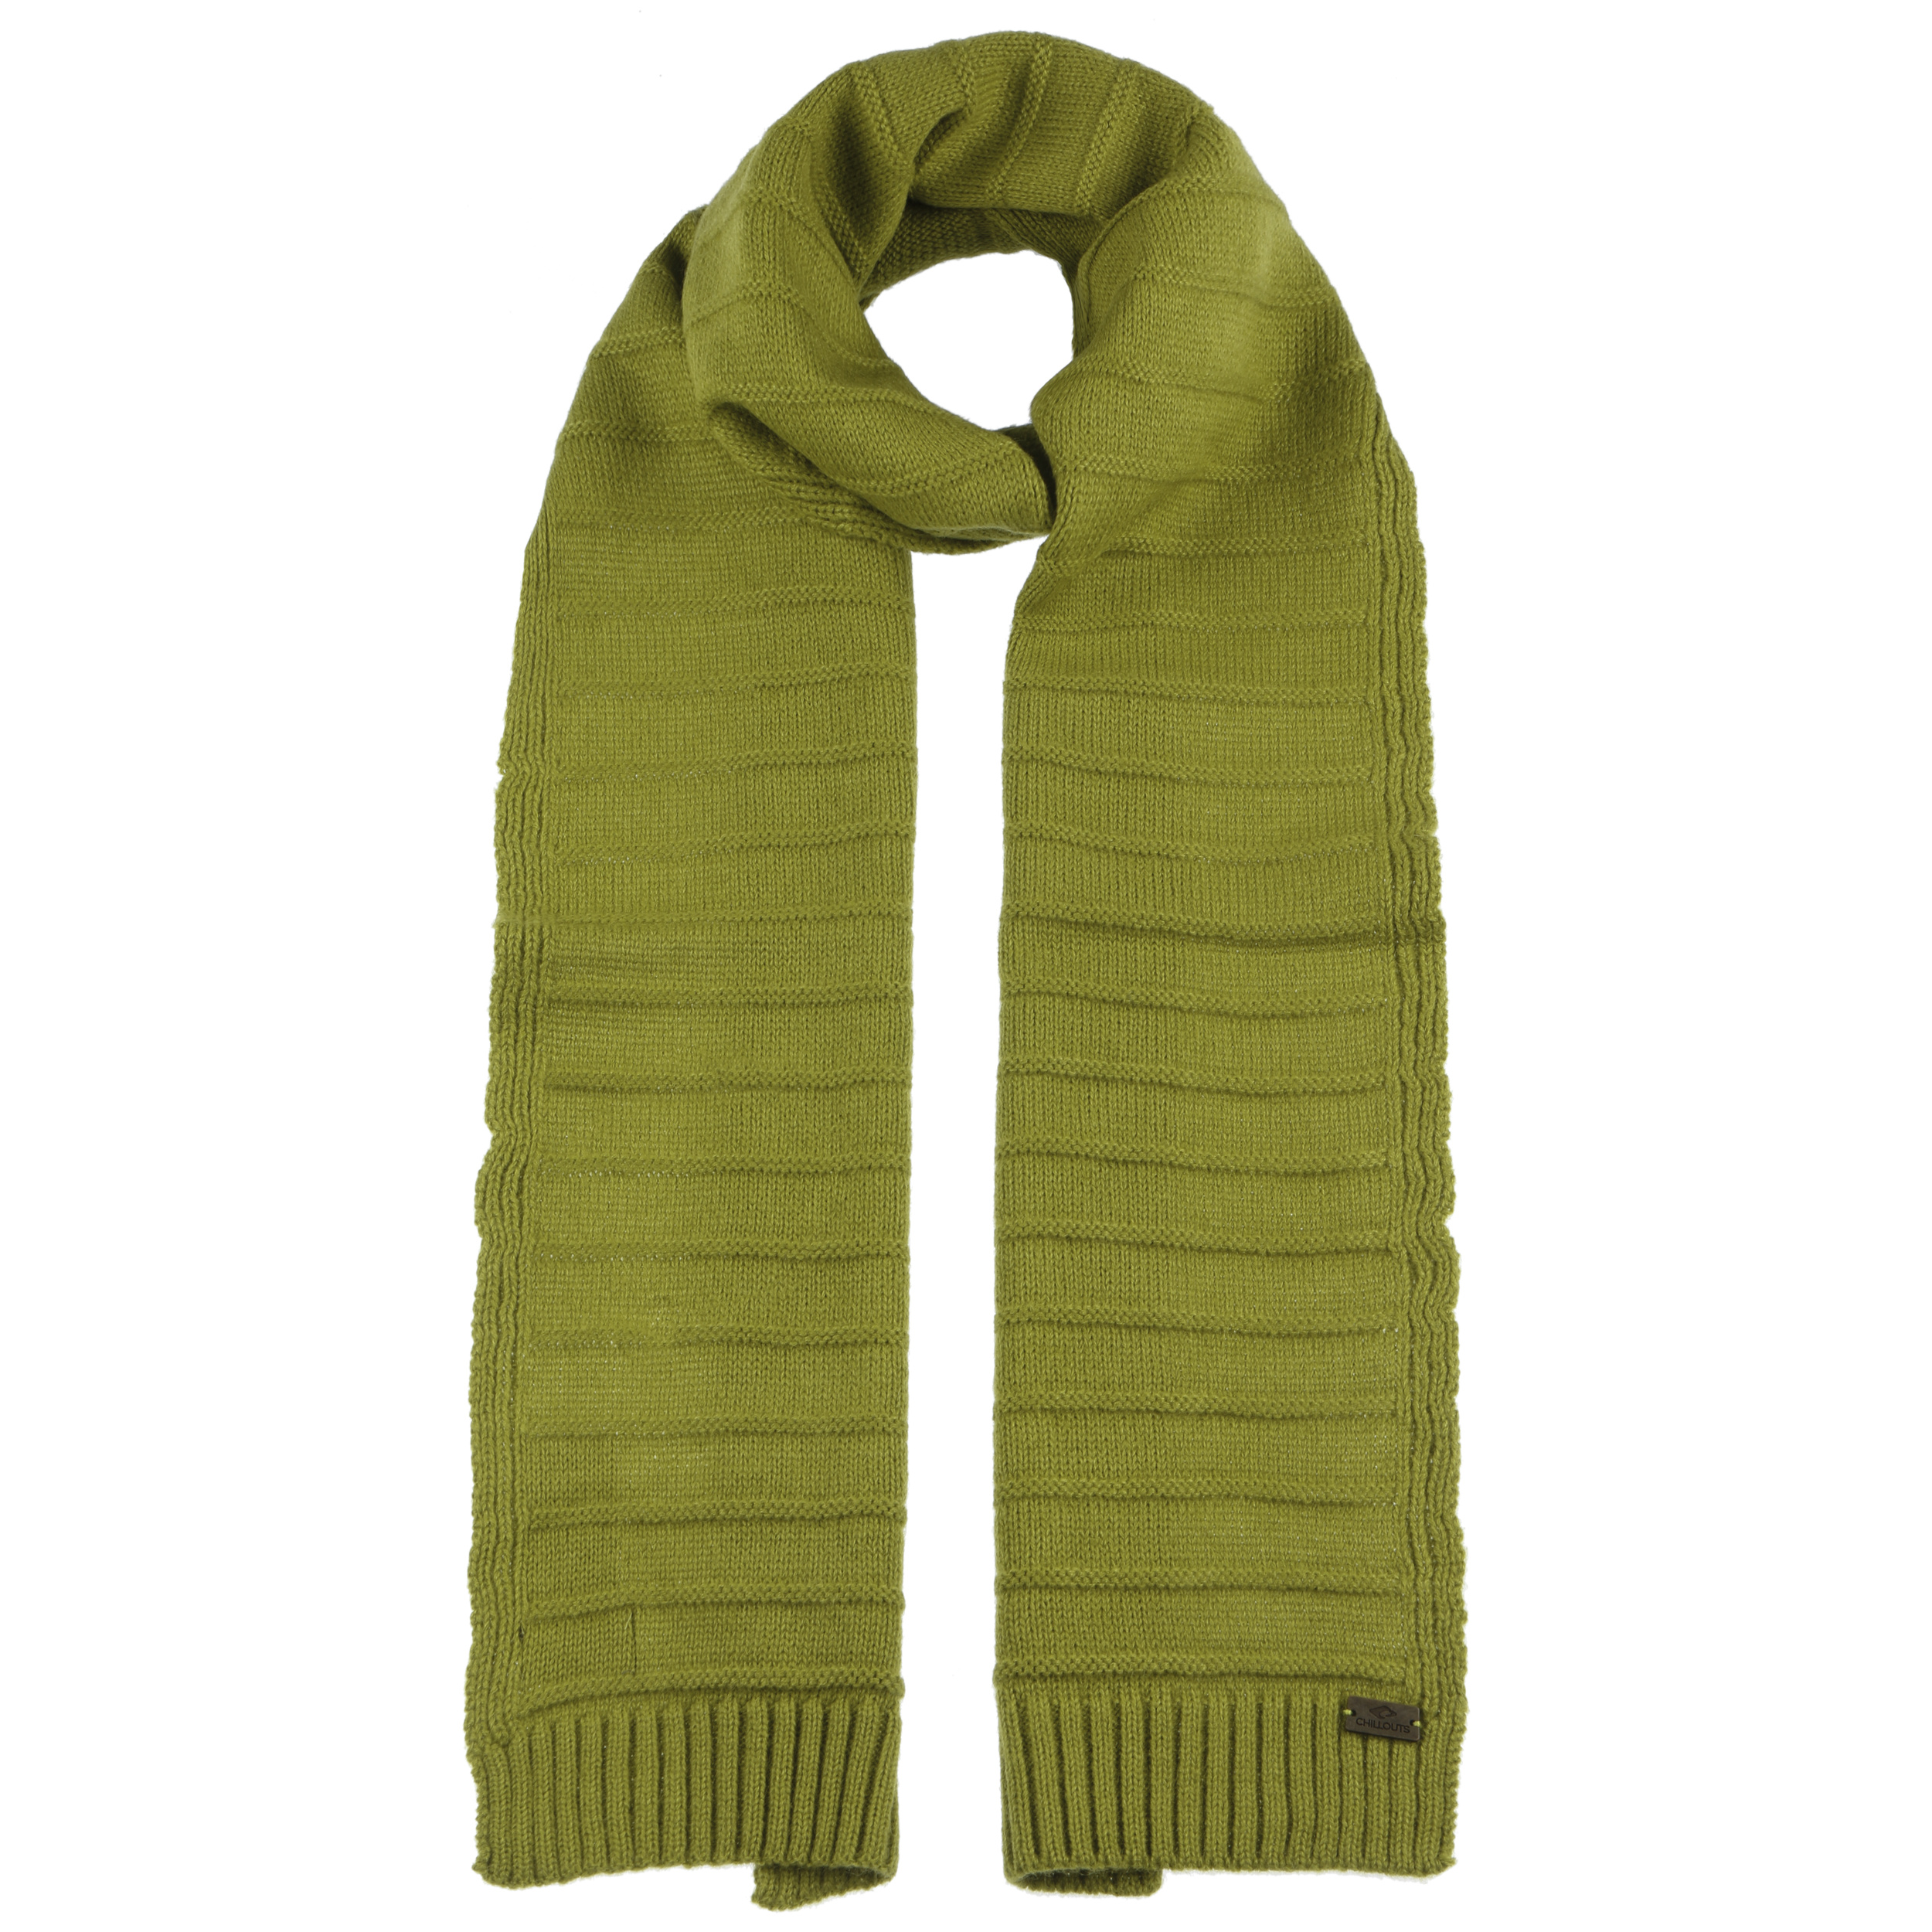 by Arne € - Chillouts Strickschal 29,99